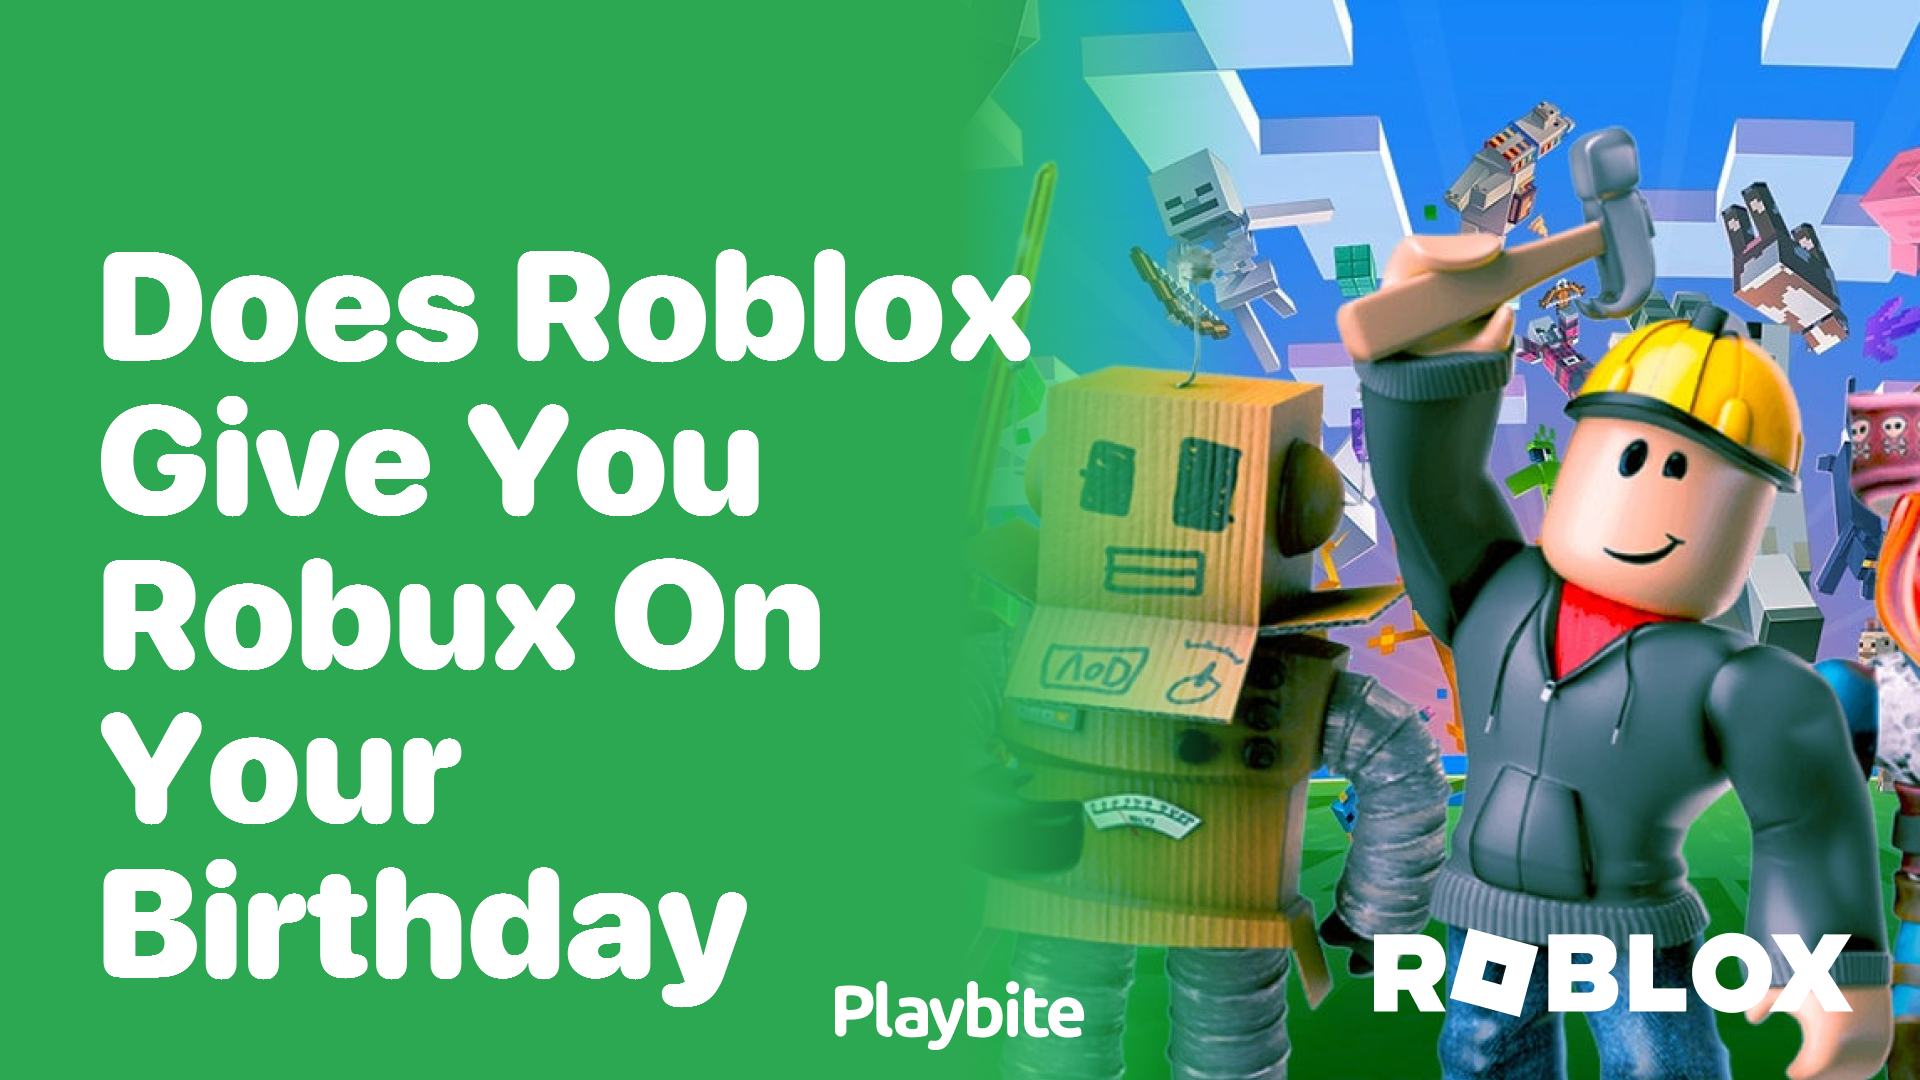 Does Roblox Give You Robux on Your Birthday?